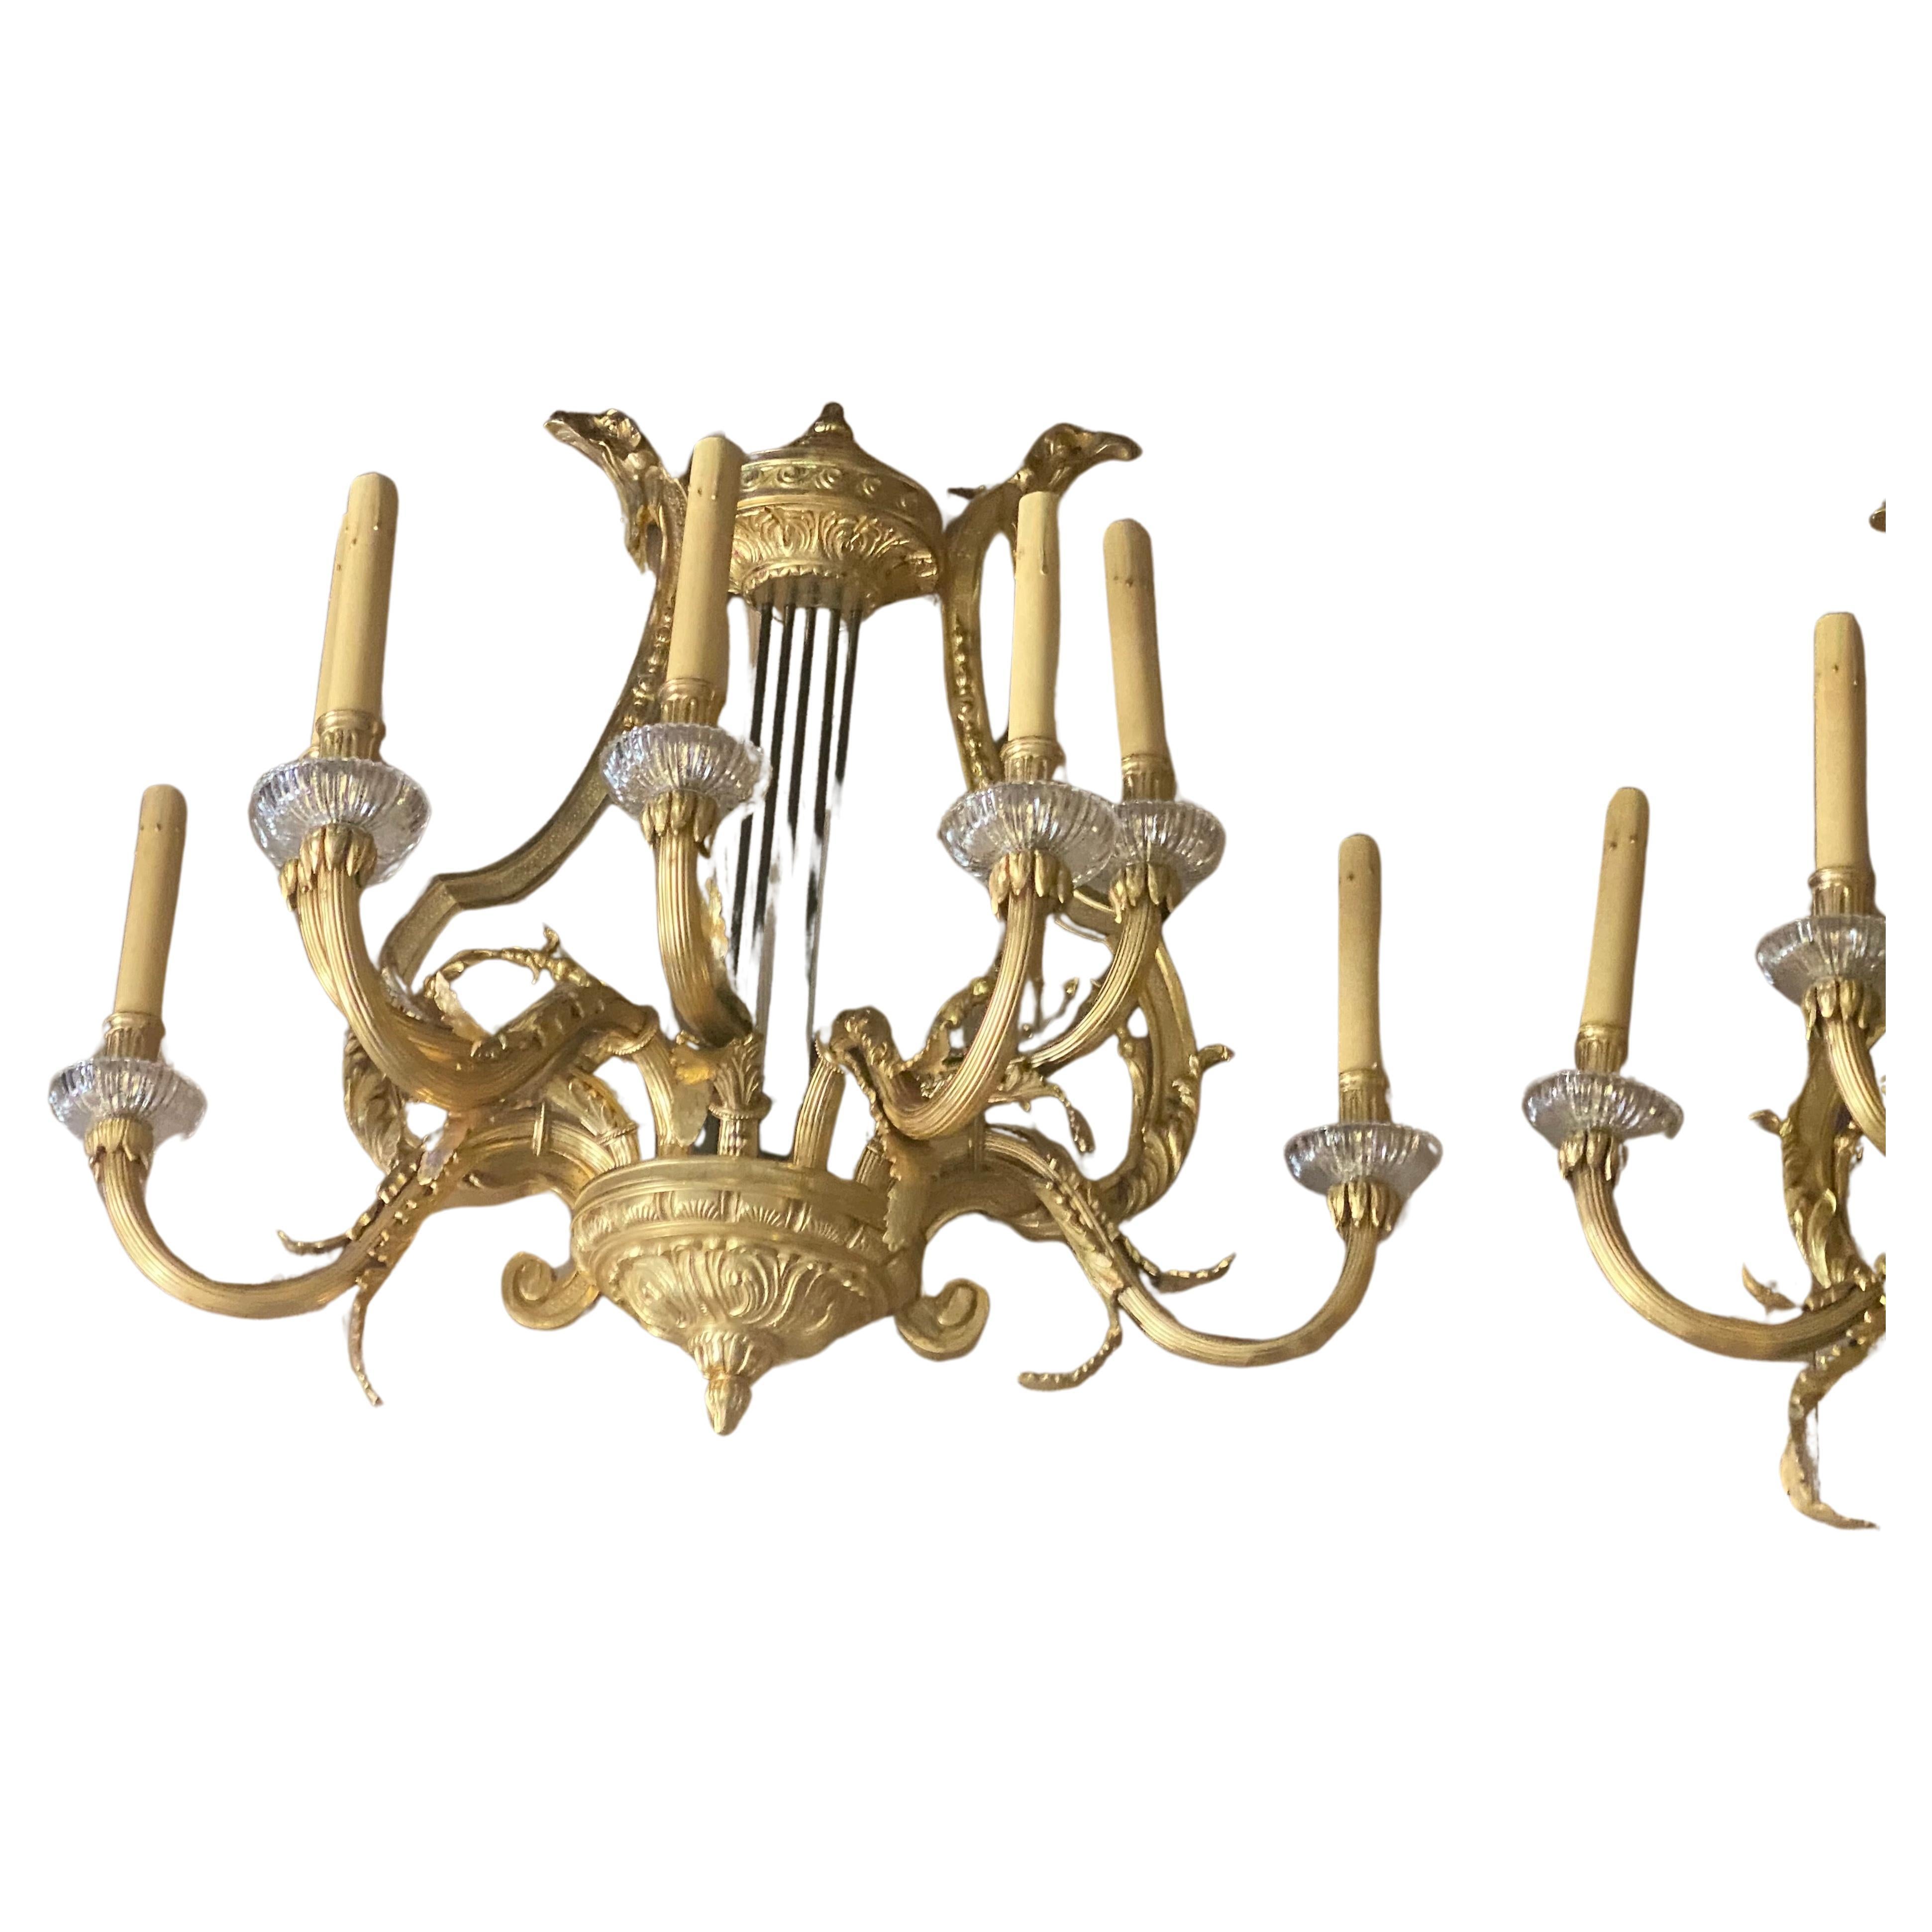 Huge Pair of 19th Century French Gilt Bronze Dore Wall Sconces For Sale 7